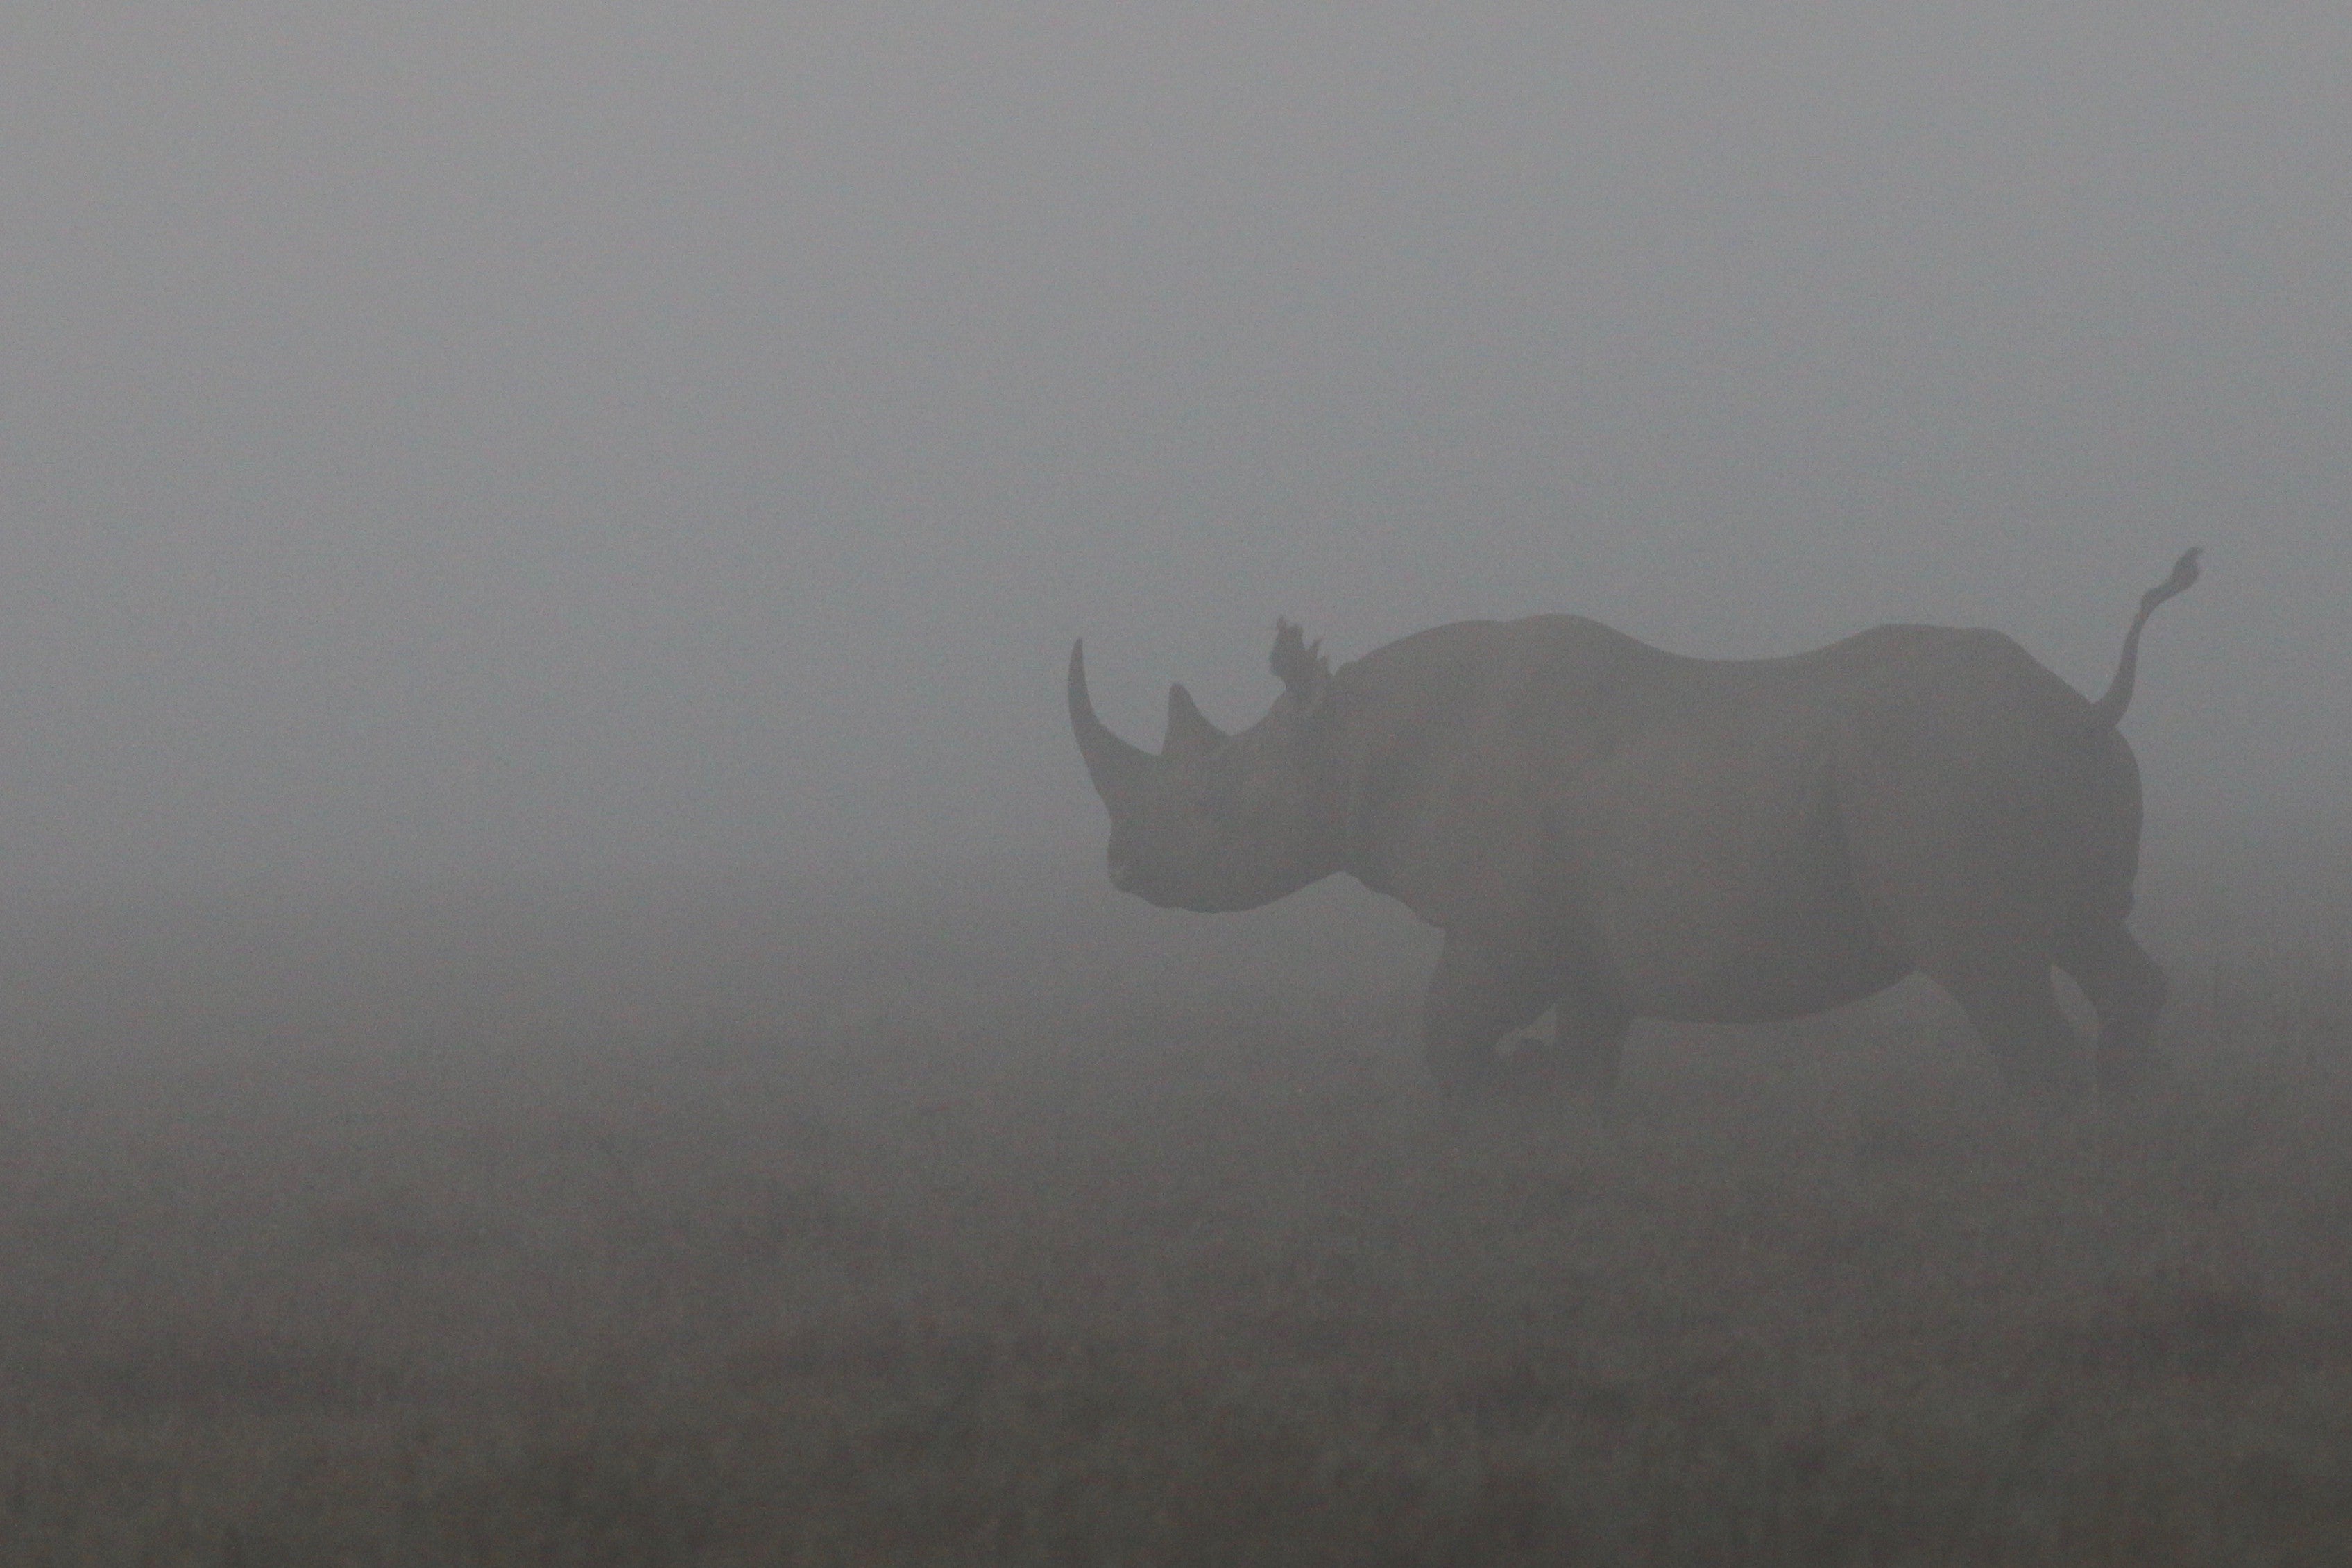 A large rhinocerous with a stocky body, short tail and long horn running through the fog